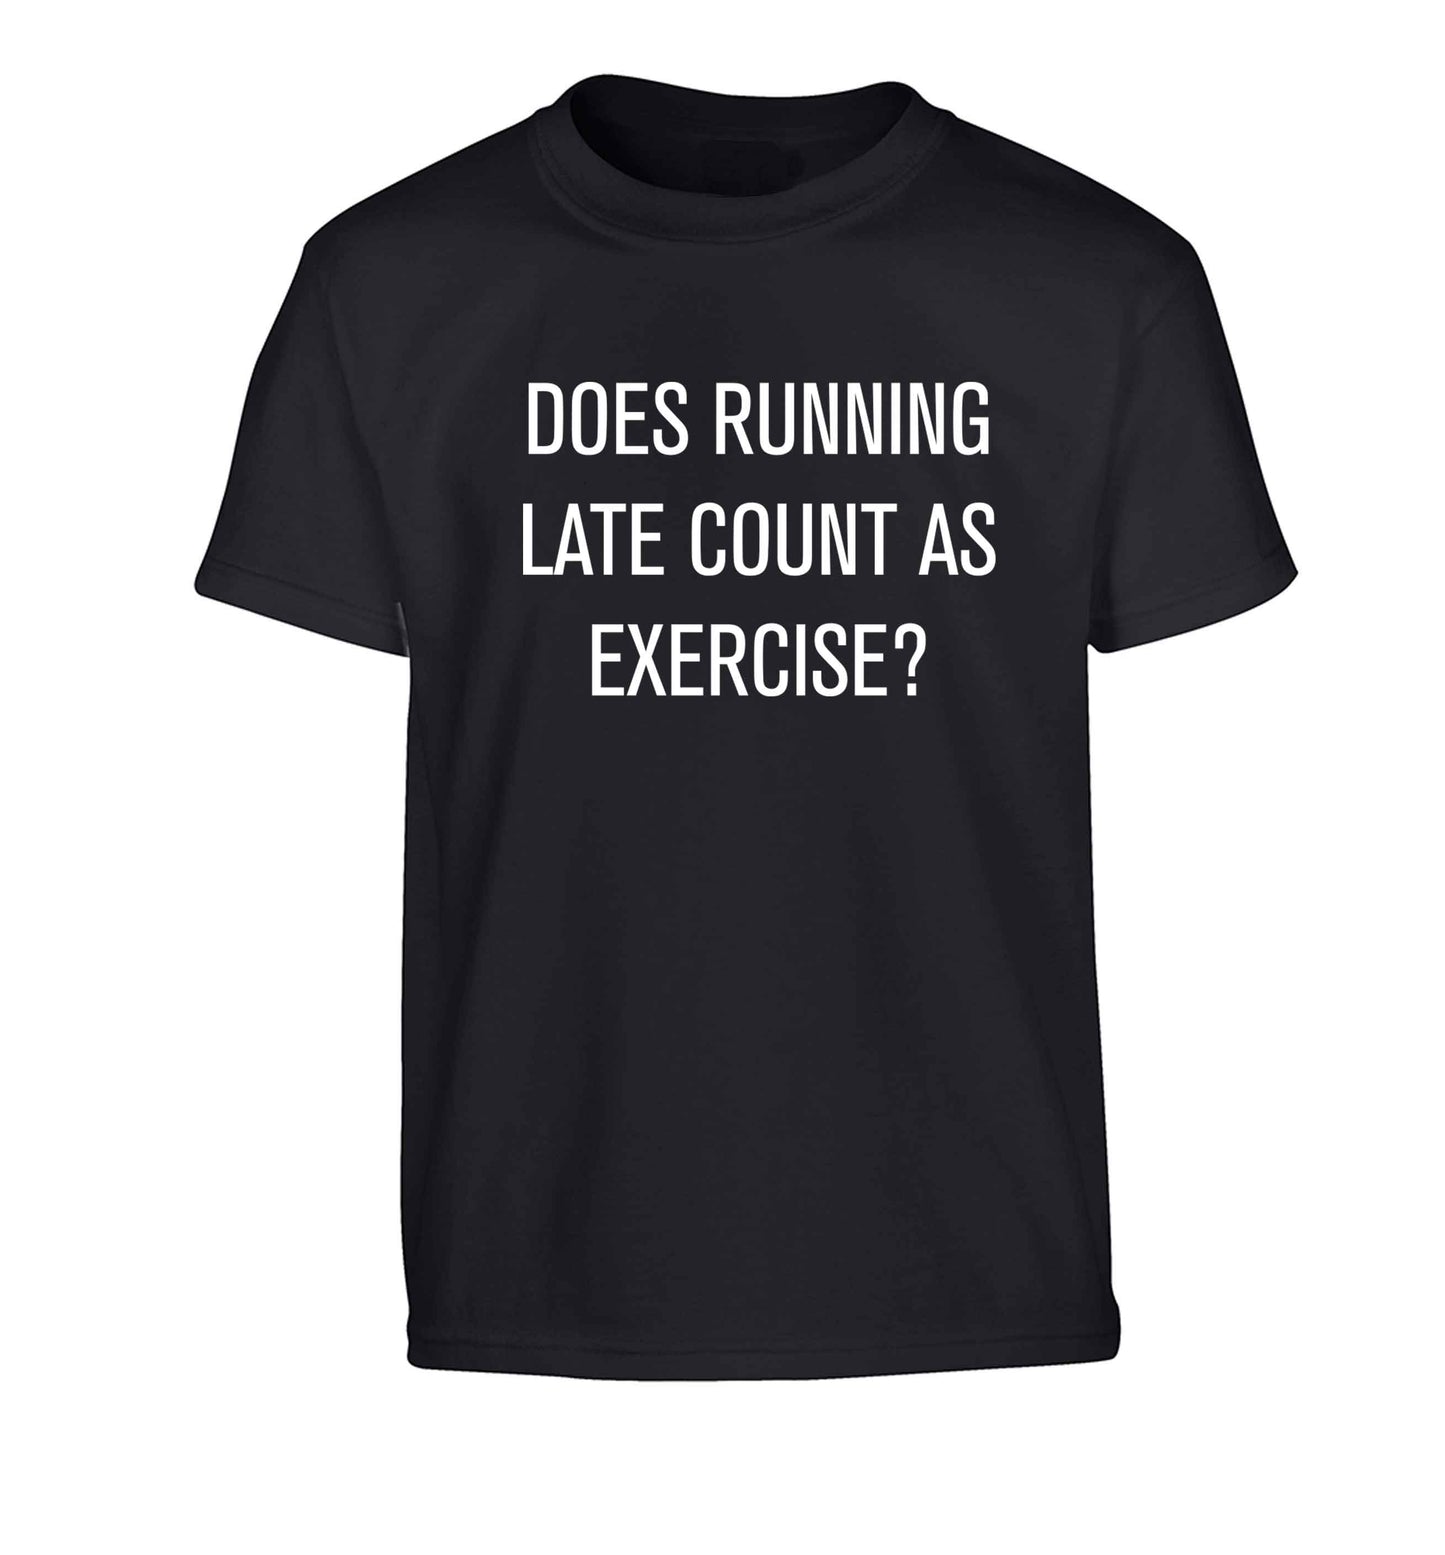 Does running late count as exercise? Children's black Tshirt 12-13 Years